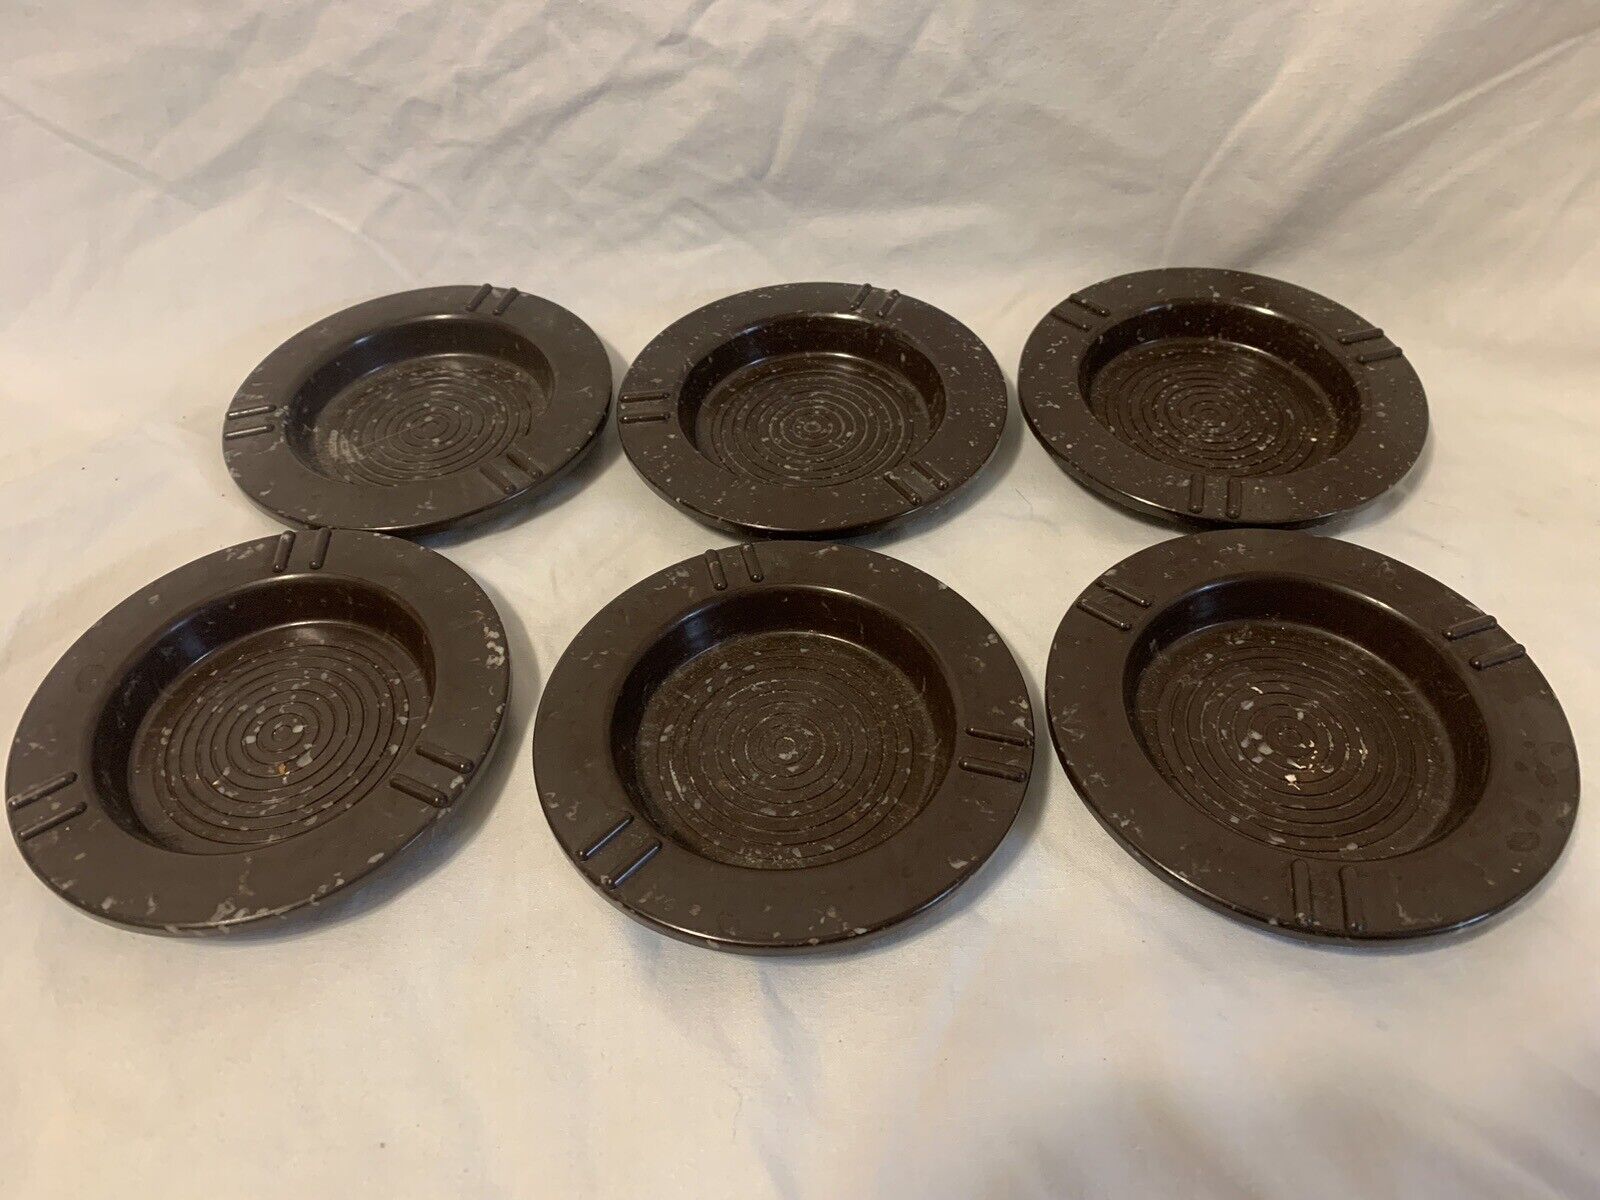 Lot of 6 Bakelite Ashtray  Brown Speckled 4 Inch In Diameter Made In The USA